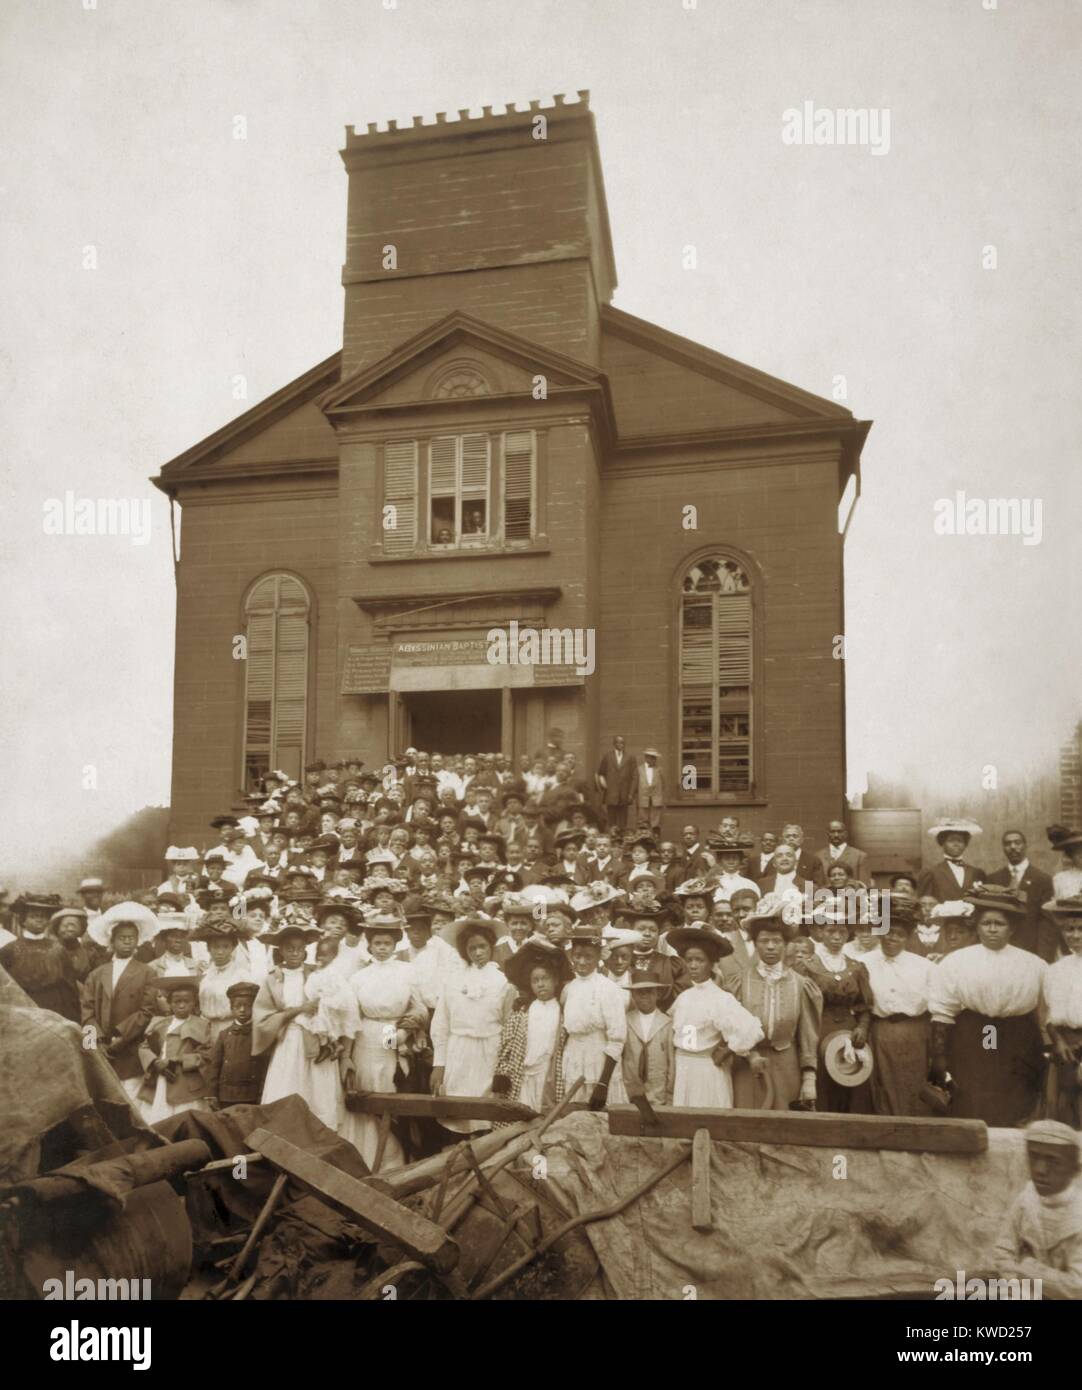 African-Americans in front of Abyssinian Baptist Church at Waverly Place, New York City, 1907. The congregation is posing for a farewell to the old church they built around 1860, in Greenwich Village, then the best African American neighborhood in Manhattan. In the 1900s the congregations was moving north to Harlem  (BSLOC 2017 20 151) Stock Photo